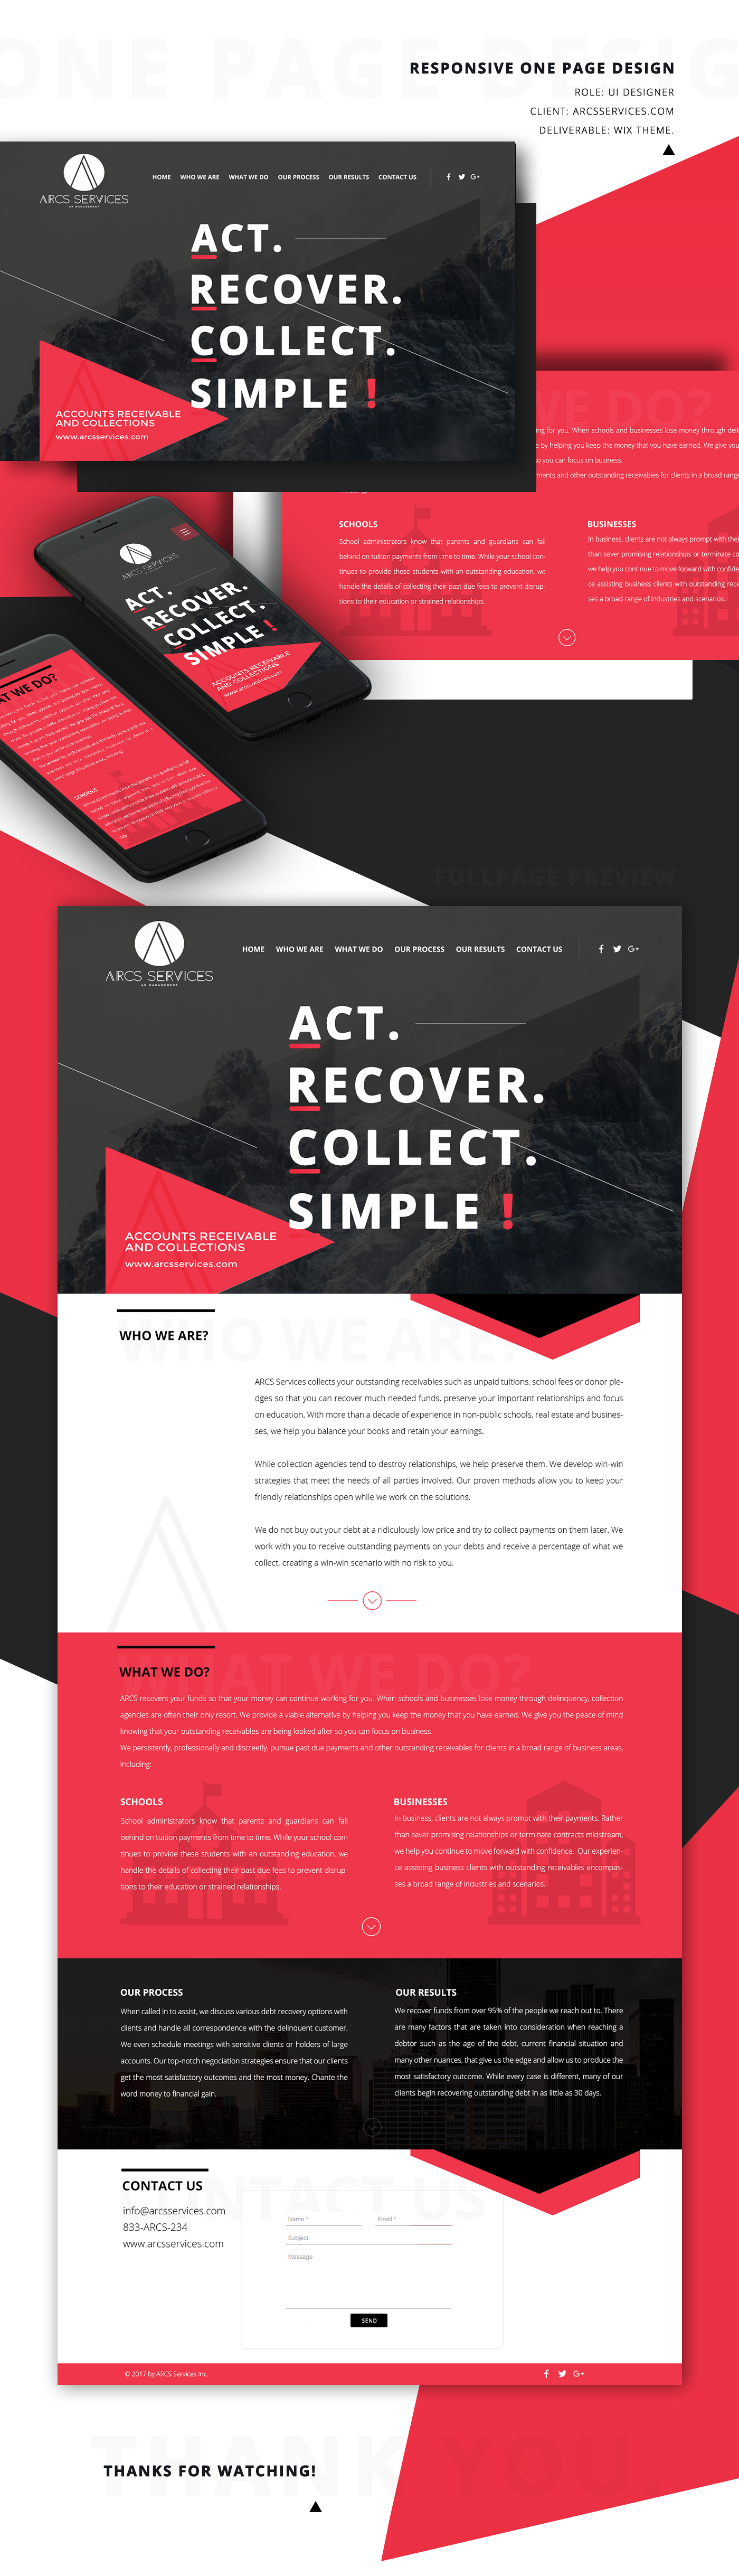 one page design Responsive wix bold big font Interface ux UI/UX Website